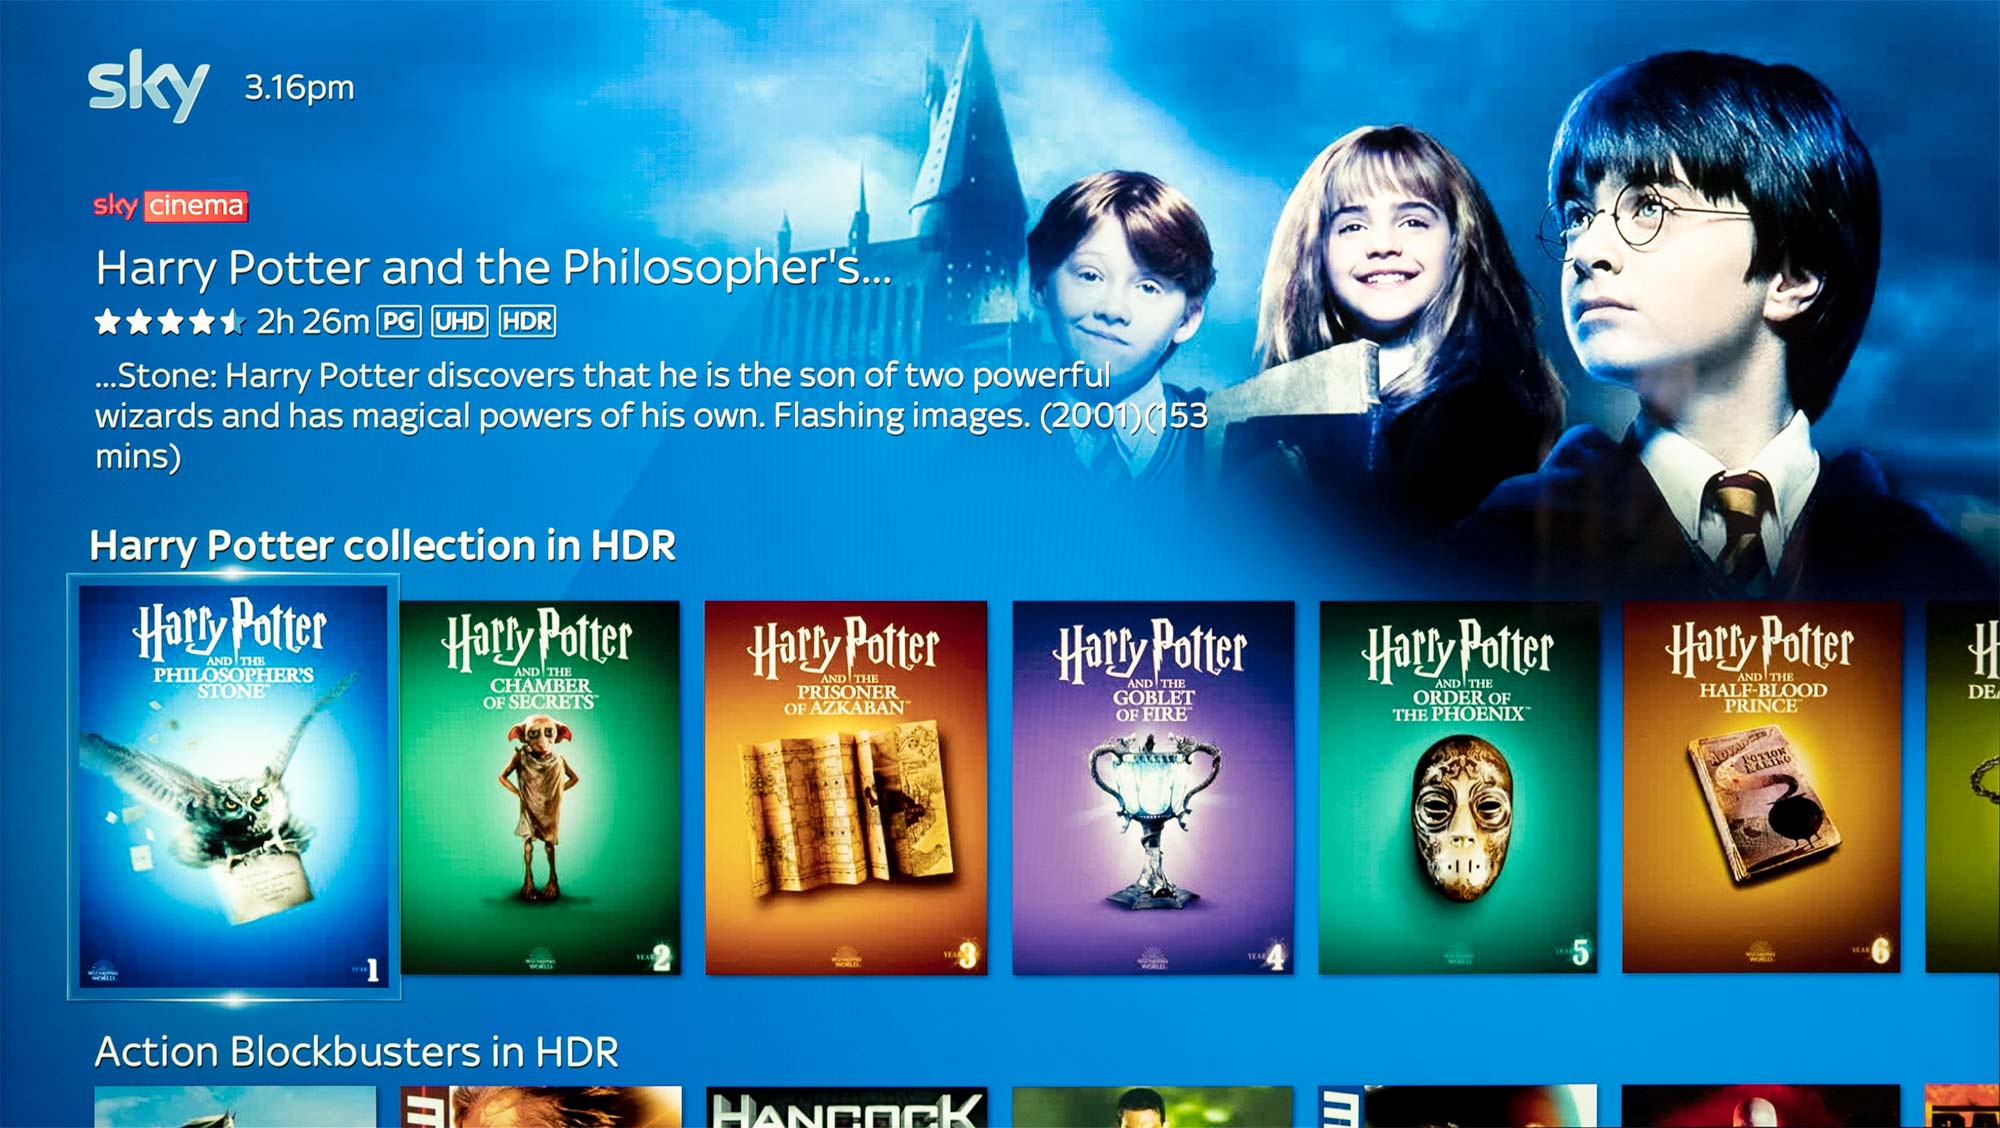 Can I watch the Harry Potter movies in Dolby Vision?